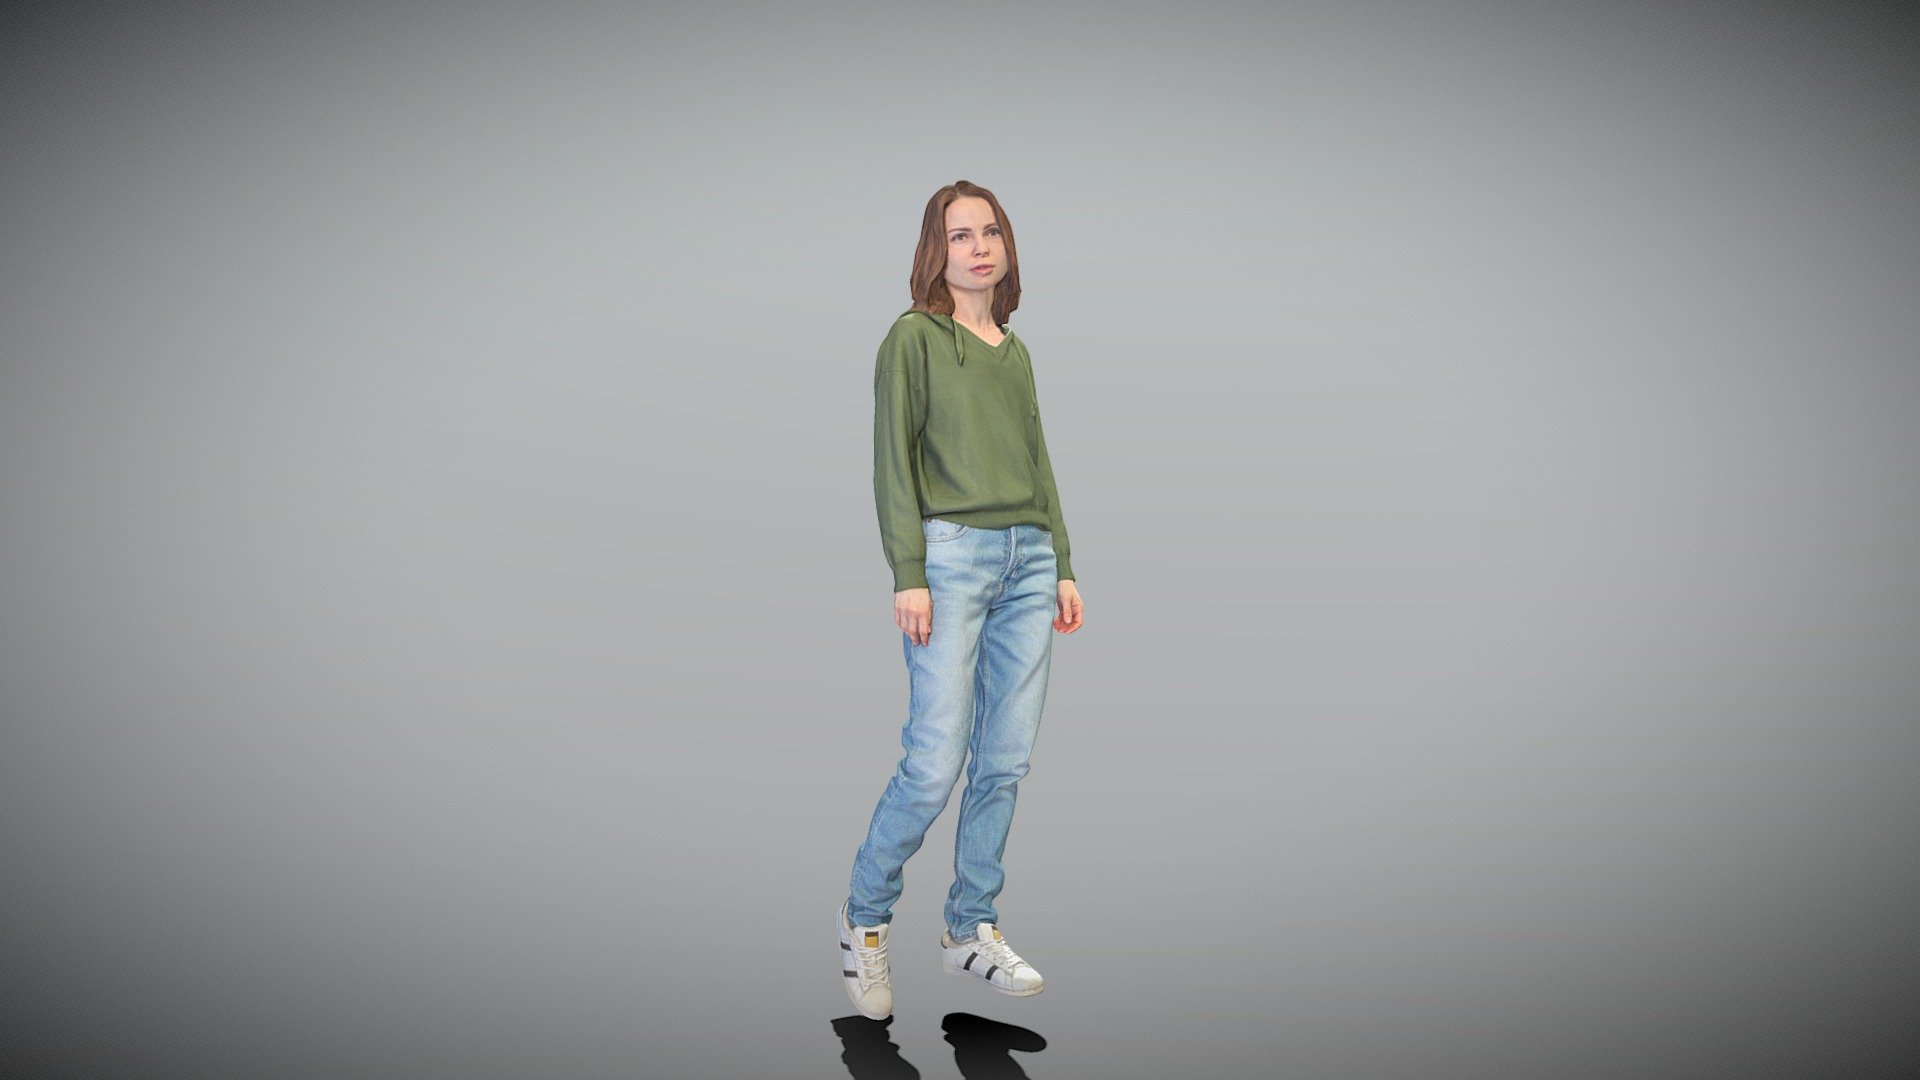 This is a true human size and detailed model of a beautiful young woman of Caucasian appearance dressed in casual outfit. The model is captured in casual pose to be perfectly matching for various architectural, product visualization as a background character within urban installations, city designs, outdoor design presentations, VR/AR content, etc.

Technical specifications:




digital double 3d scan model

150k &amp; 30k triangles | double triangulated

high-poly model (.ztl tool with 5 subdivisions) clean and retopologized automatically via ZRemesher

sufficiently clean

PBR textures 8K resolution: Diffuse, Normal, Specular maps

non-overlapping UV map

no extra plugins are required for this model

Download package includes a Cinema 4D project file with Redshift shader, OBJ, FBX, STL files, which are applicable for 3ds Max, Maya, Unreal Engine, Unity, Blender, etc. All the textures you will find in the “Tex” folder, included into the main archive.

3D EVERYTHING

Stand with Ukraine! - Young woman walking in casual outfit 396 - Buy Royalty Free 3D model by deep3dstudio 3d model